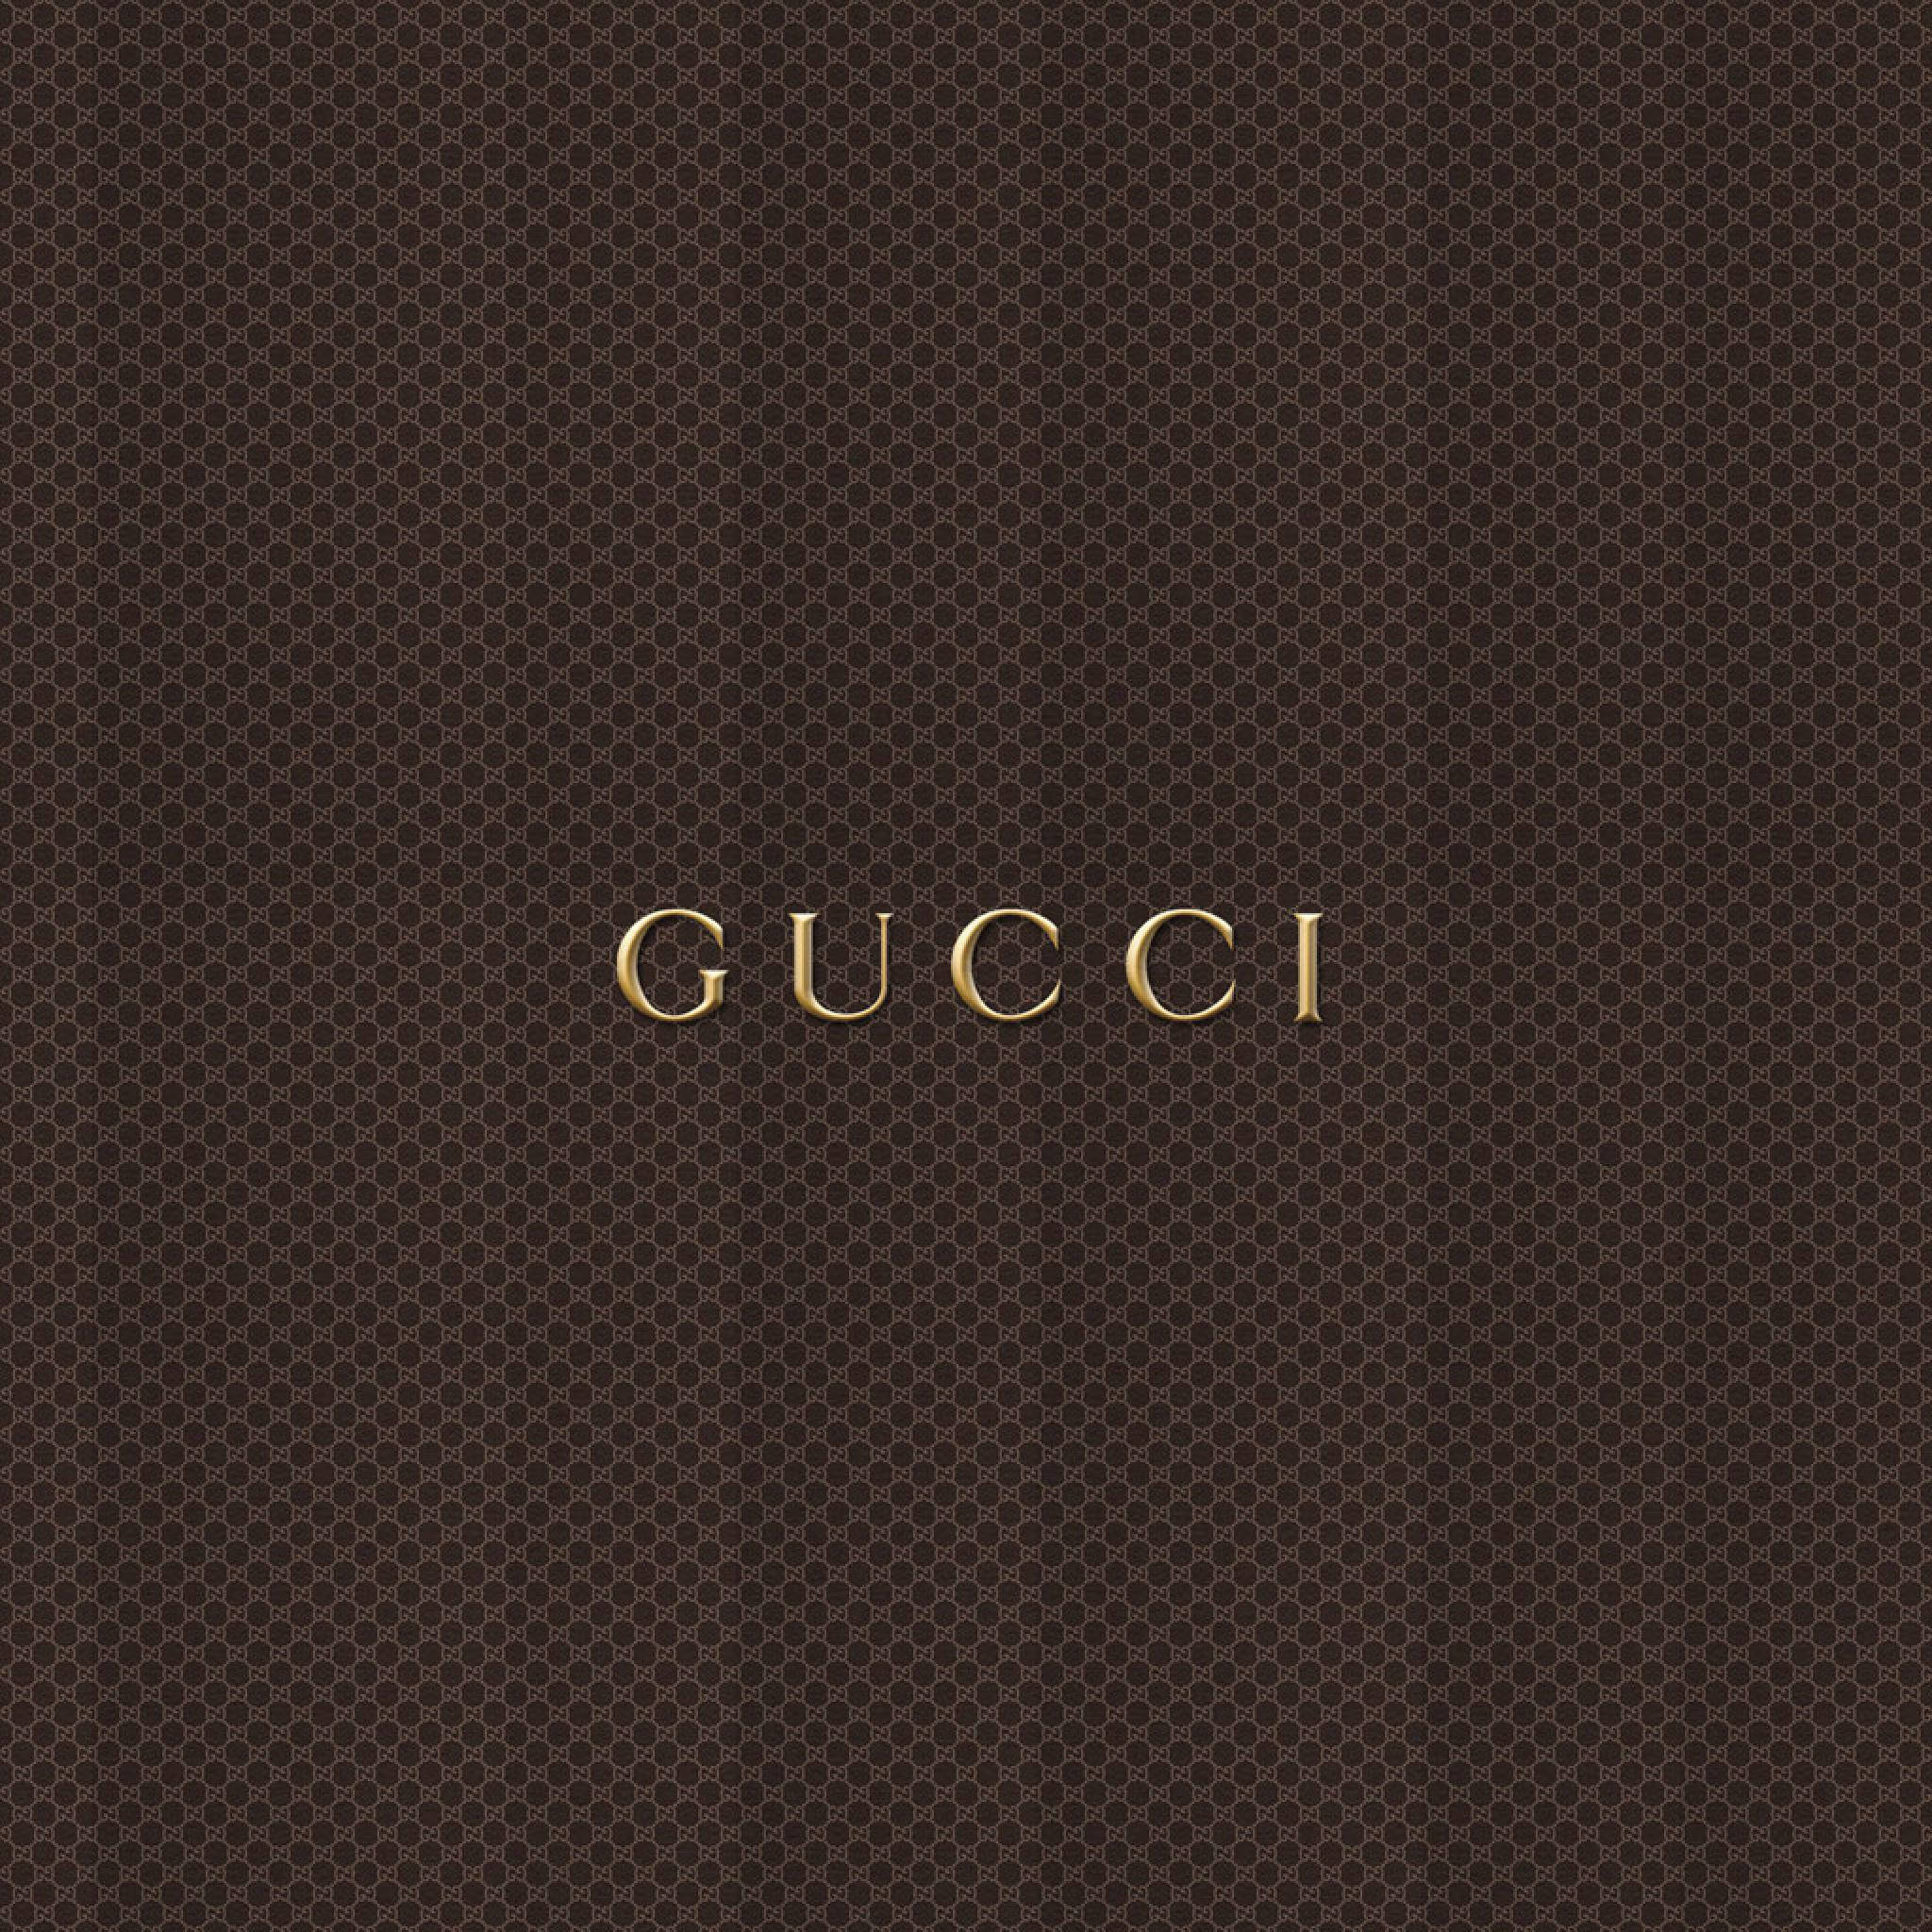 Download Brown Aesthetic Gucci Pattern Wallpaper | Wallpapers.com